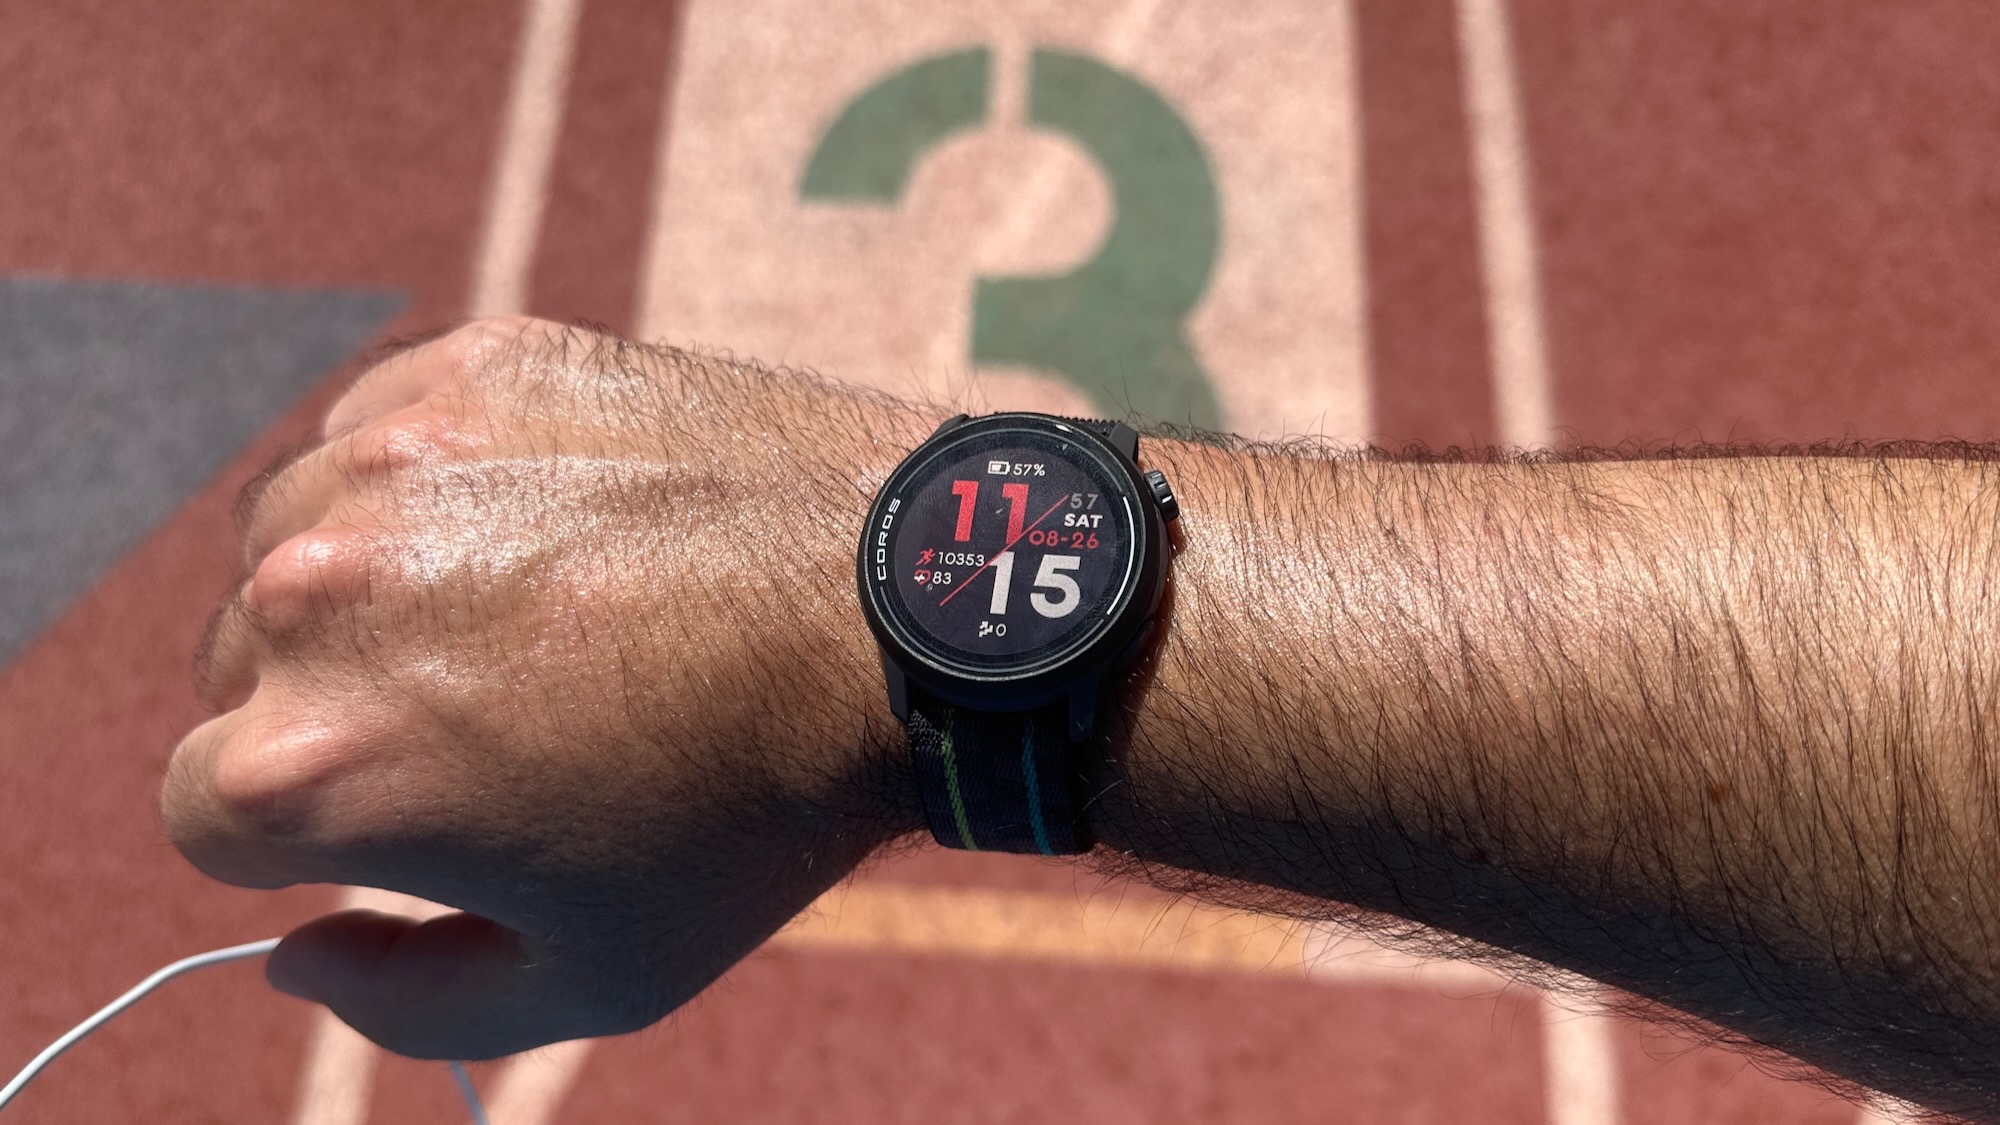 Coros Pace 2 GPS watch review - lightweight, well priced and user